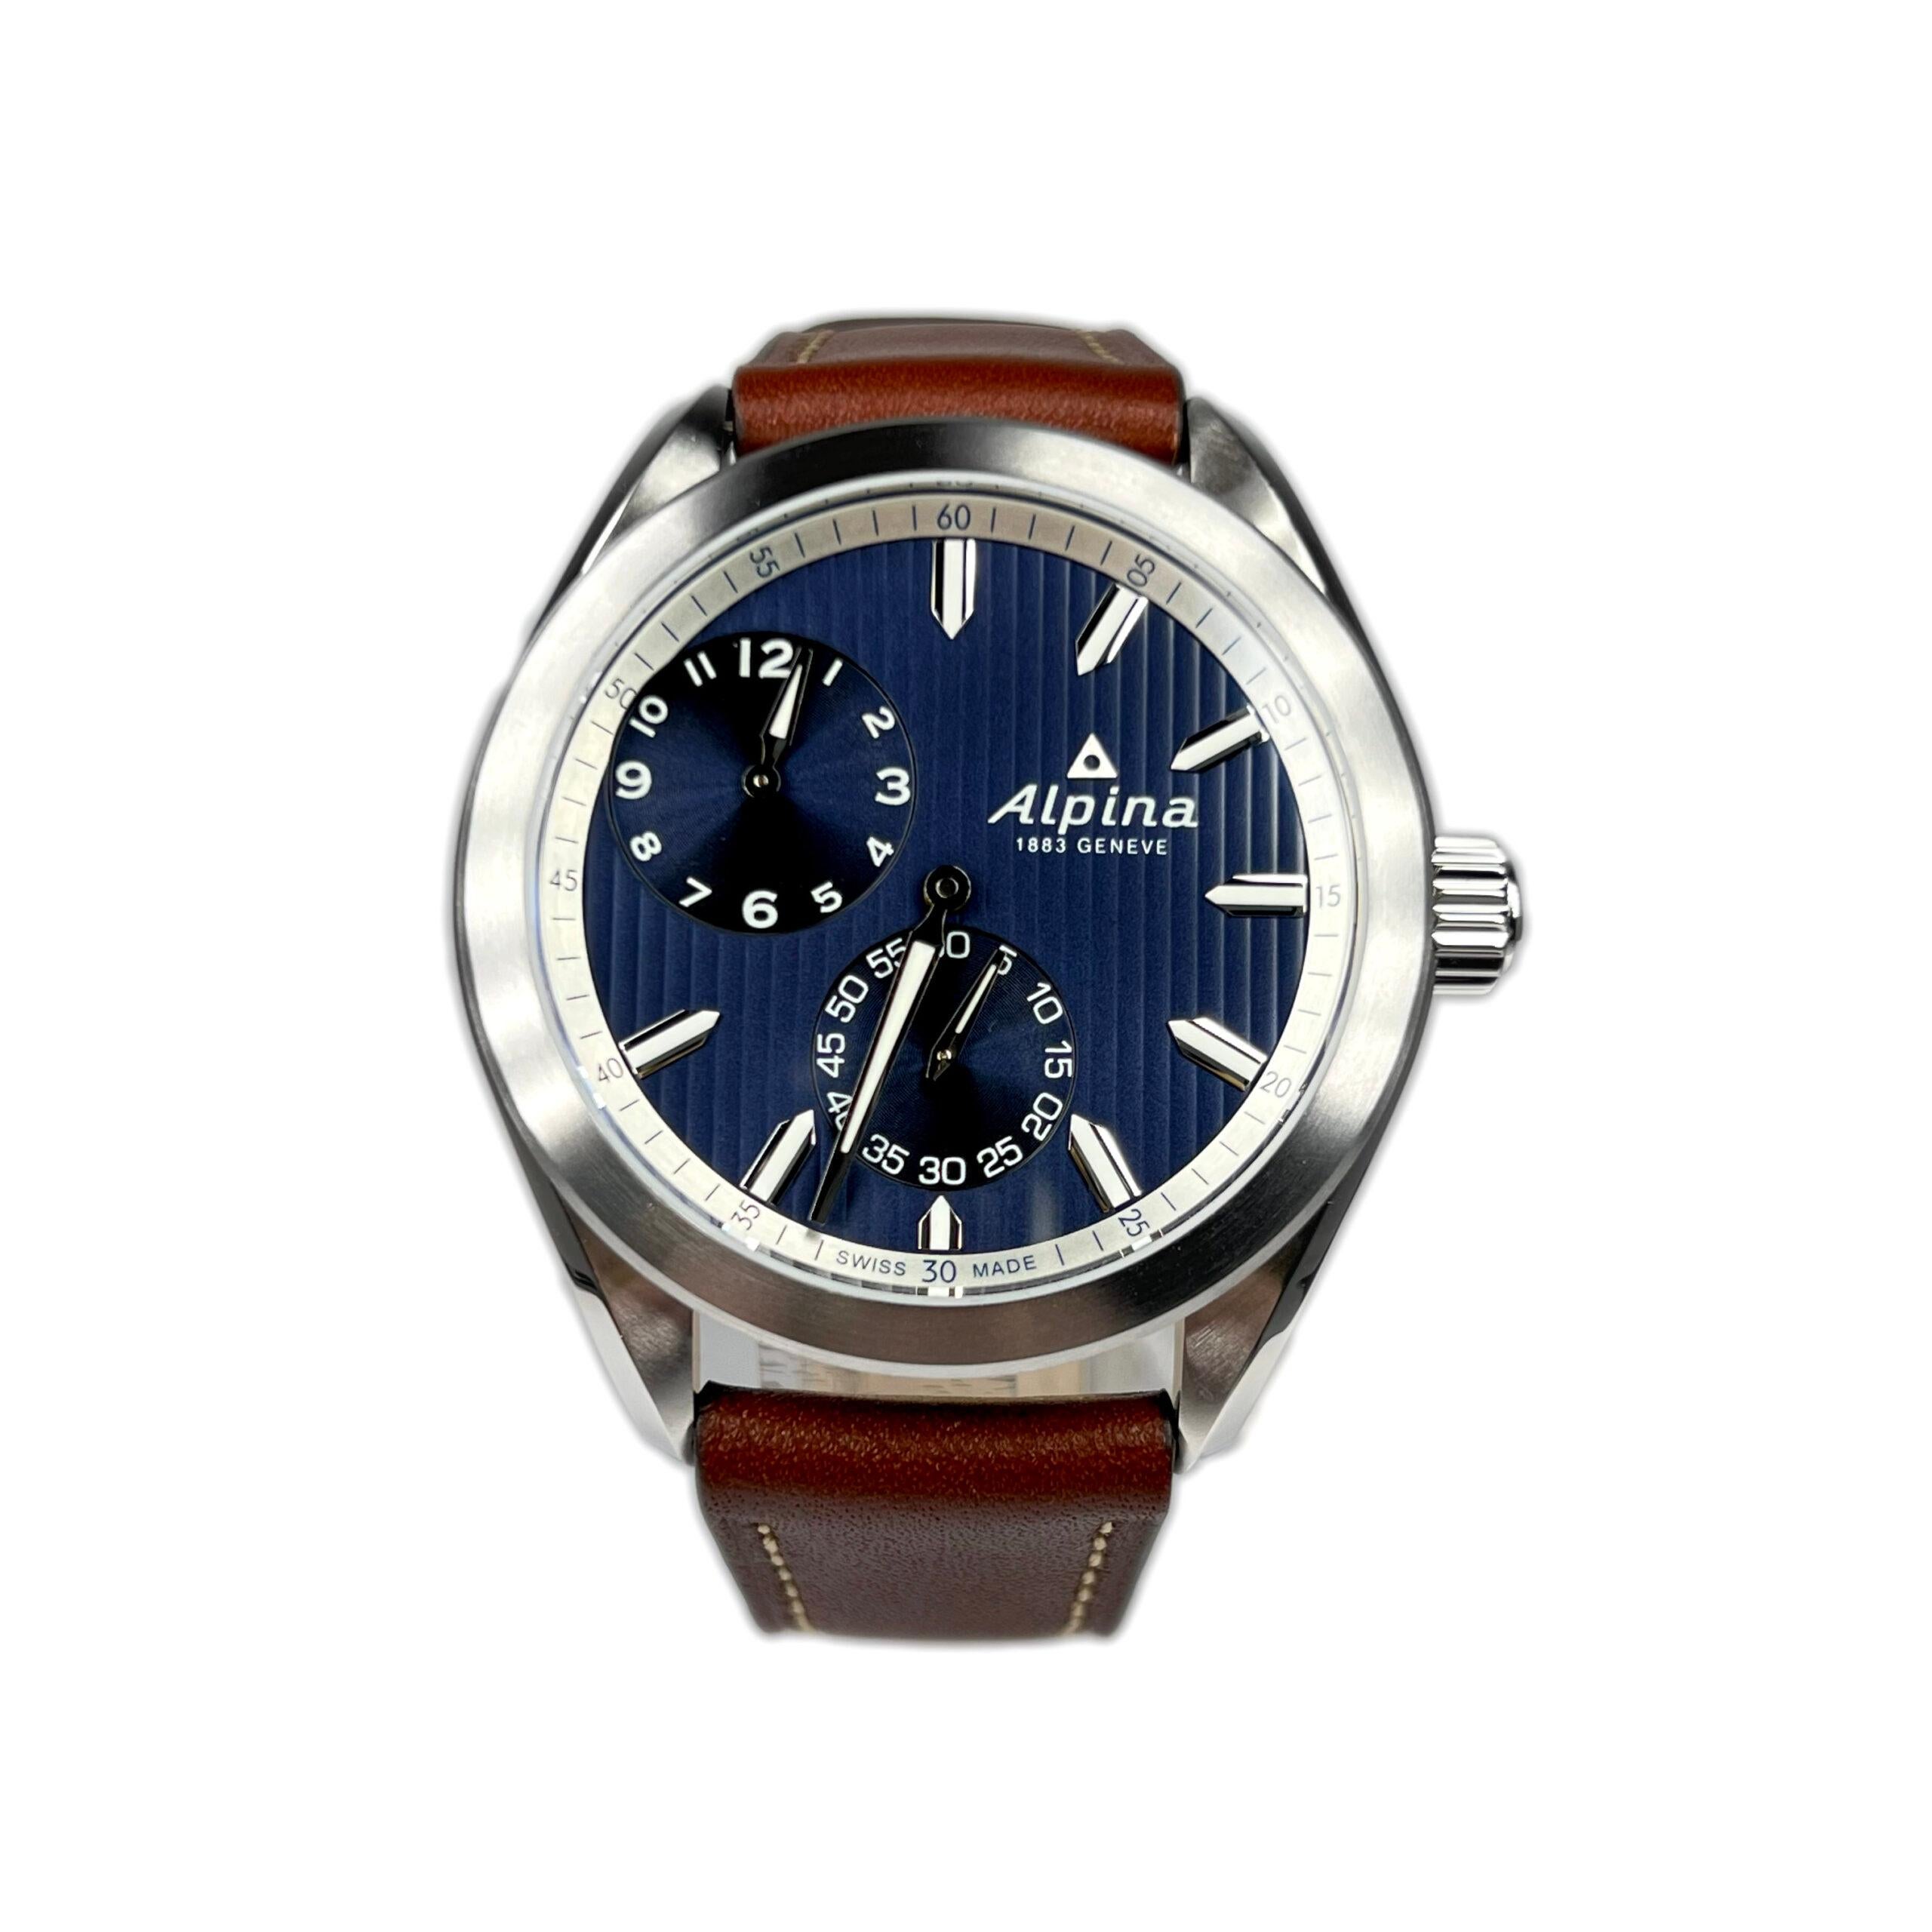 This Men’s Watch has a 45 mm silver-tone stainless steel case with a brown leather strap. Fixed silver-tone stainless steel bezel. Blue dial with silver-tone hands and index hour markers. Minute markers around the outer rim. Dial Type: Analog.